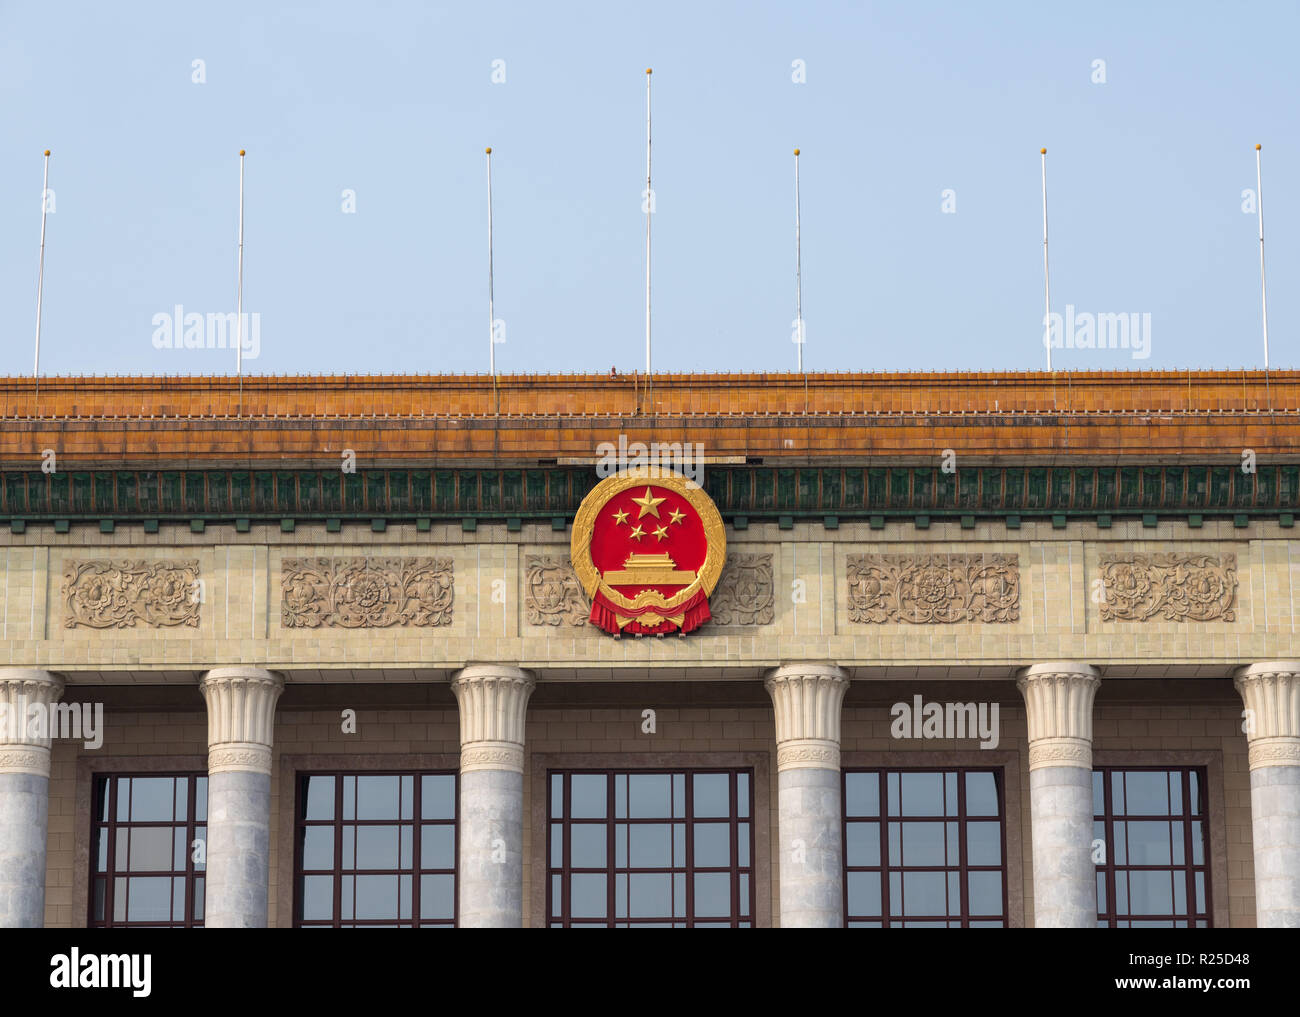 Crest on Great Hall of the People in Tiananmen Square Stock Photo